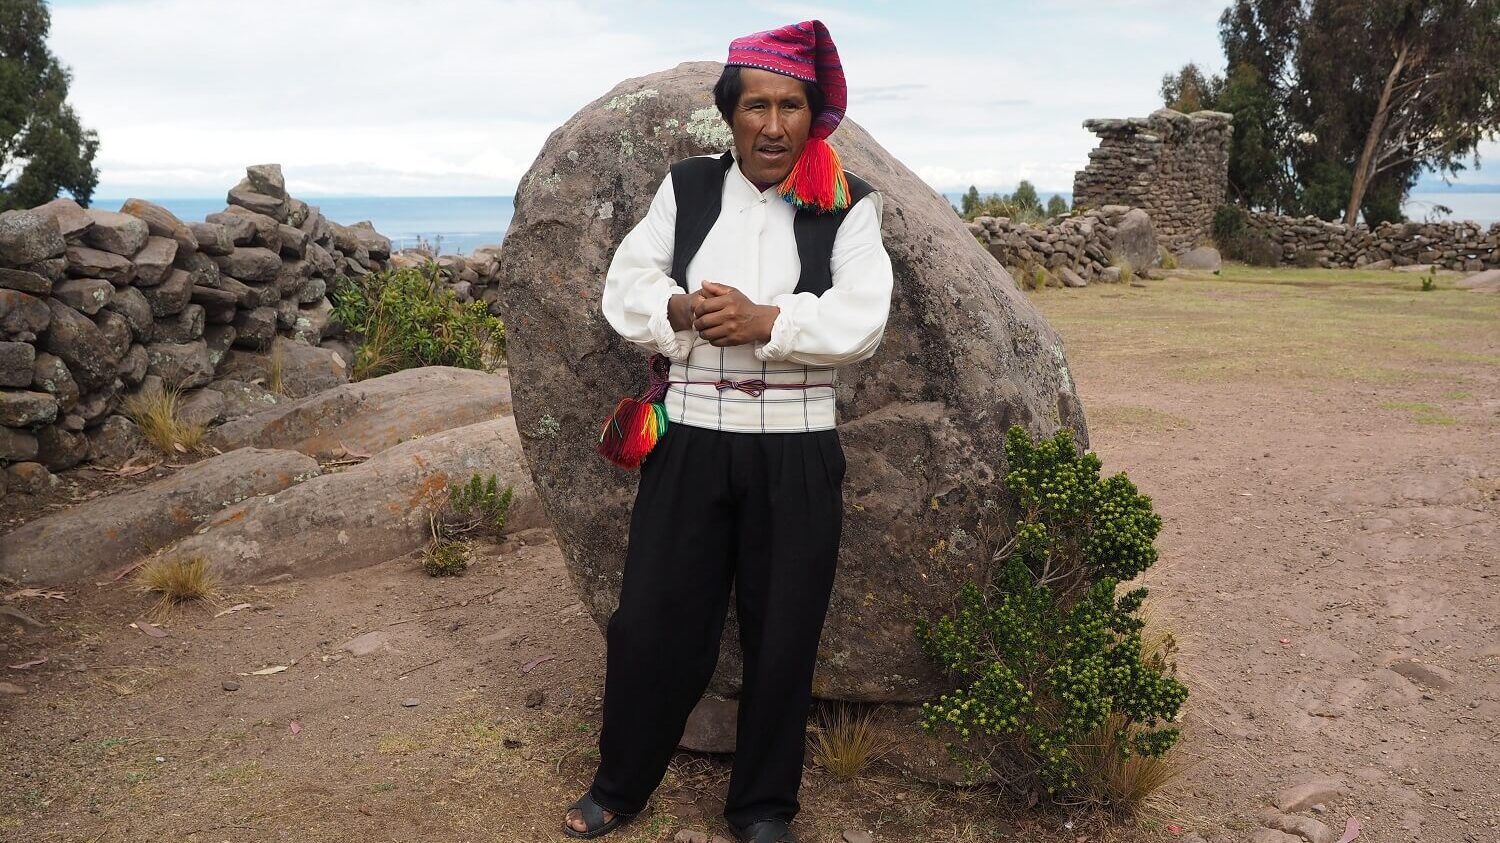 Homestay host from Taquile island in Lake Titicaca dressed in traditional clothes. Community-Based tourism in Peru with RESPONSible Travel Peru